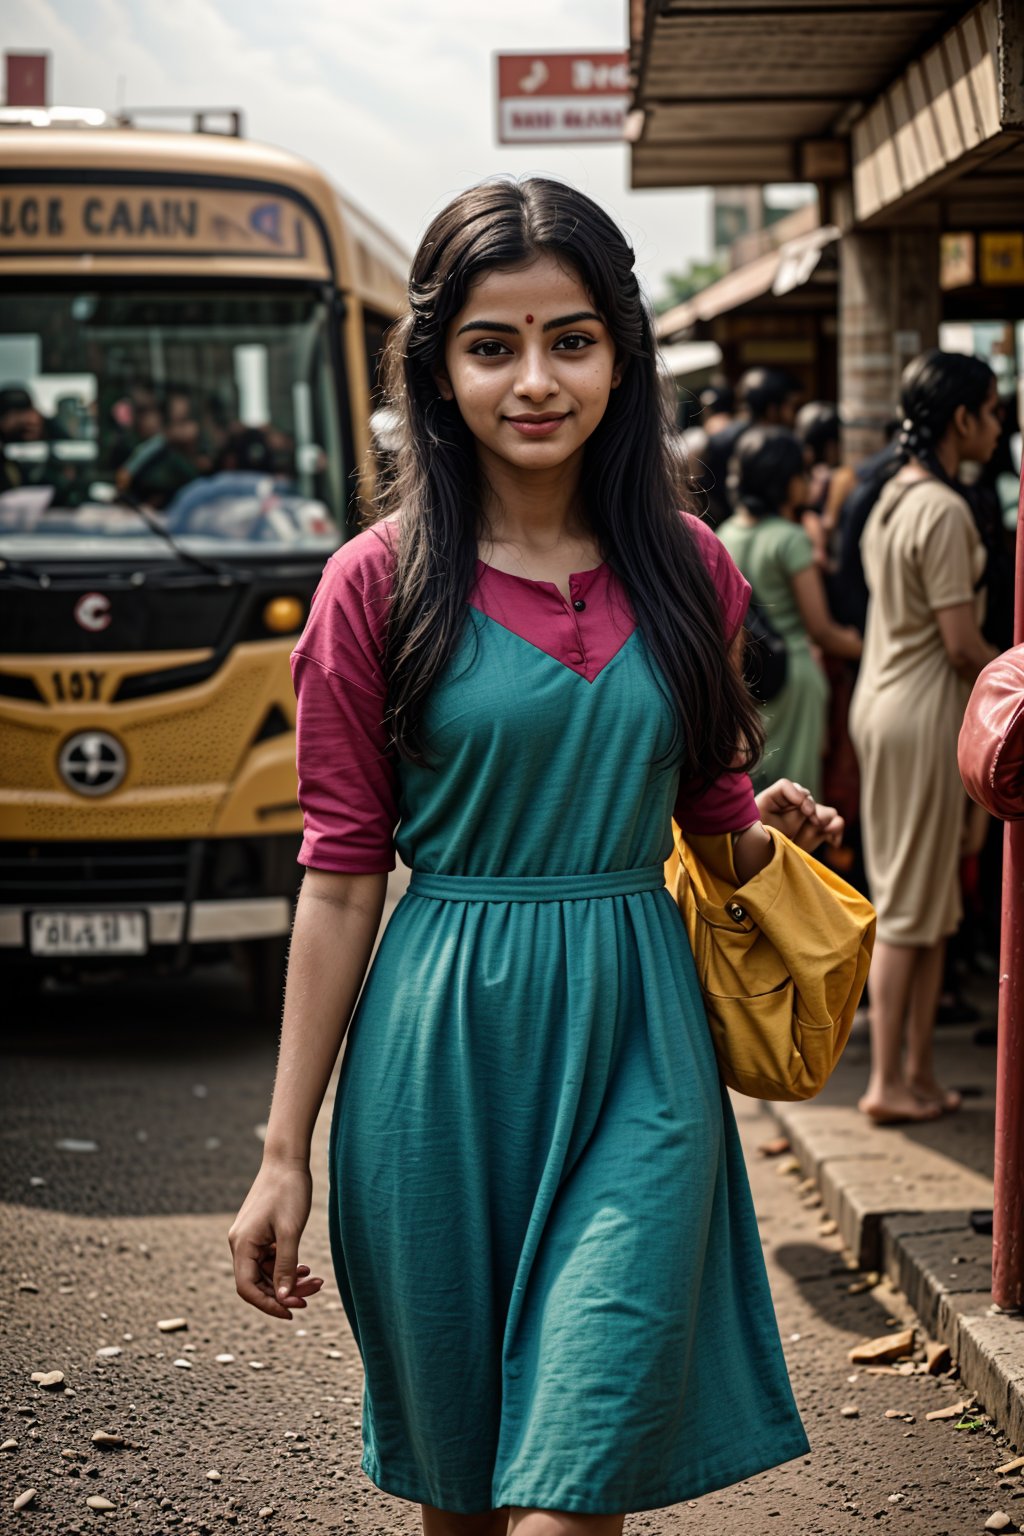 25yo girls walking on road, Crowd city, girls walking, crowd city, car, KSRTC Bus:0.8, busy city, color full dress, vibrant colours dresses, 
Create an realistic concept centered, timeless beauty. Her expressive eyes are windows to a world of emotion, her captivating smile leaves an indelible mark, and her flowing hair is a visual poetry. Explore how her gentle touch creates an aura that infuses every shared moment with a sense of destiny and magic. Develop the storyline, characters, and the world in which this enchanting girl exists,Realism, Mallugirl, Thrissur, Very crowded 